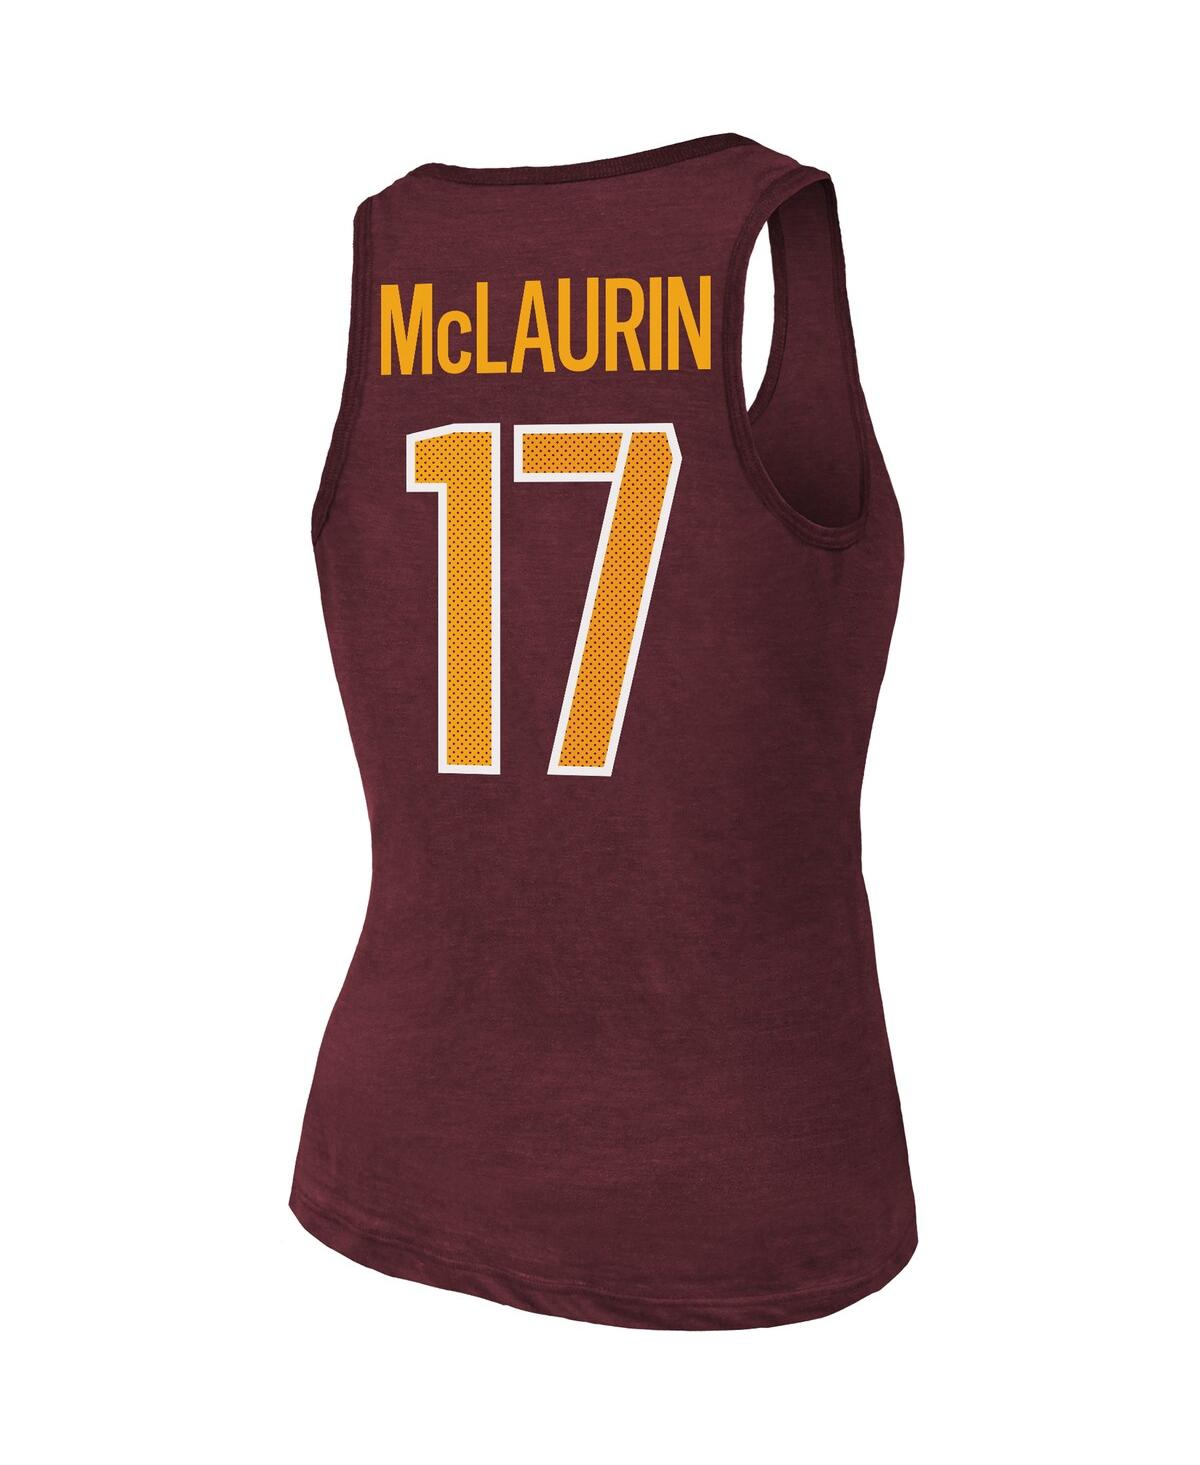 Shop Majestic Women's  Threads Terry Mclaurin Burgundy Washington Commanders Player Name & Number Tri-blen